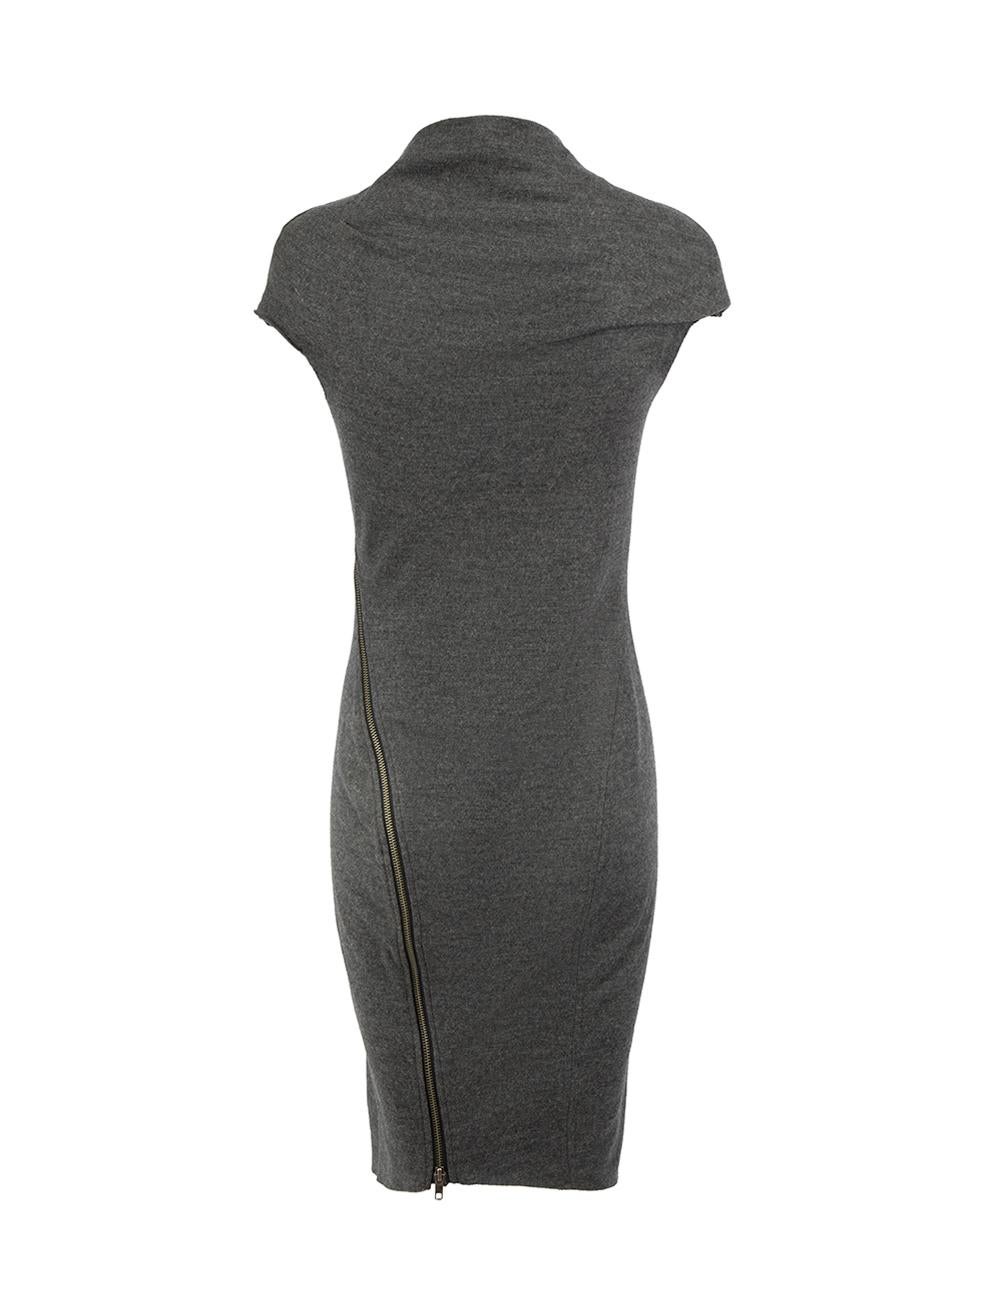 Helmut Lang Grey Wool Zip Knee Length Dress Size S In Excellent Condition In London, GB